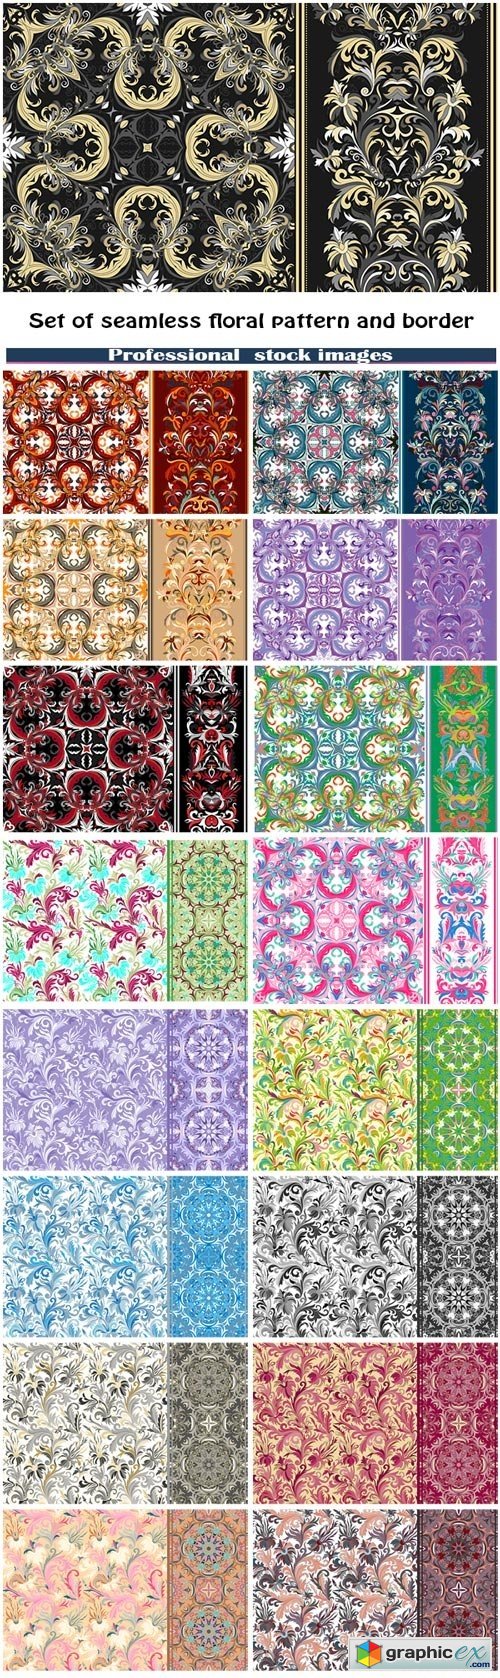 Set of seamless floral pattern and border